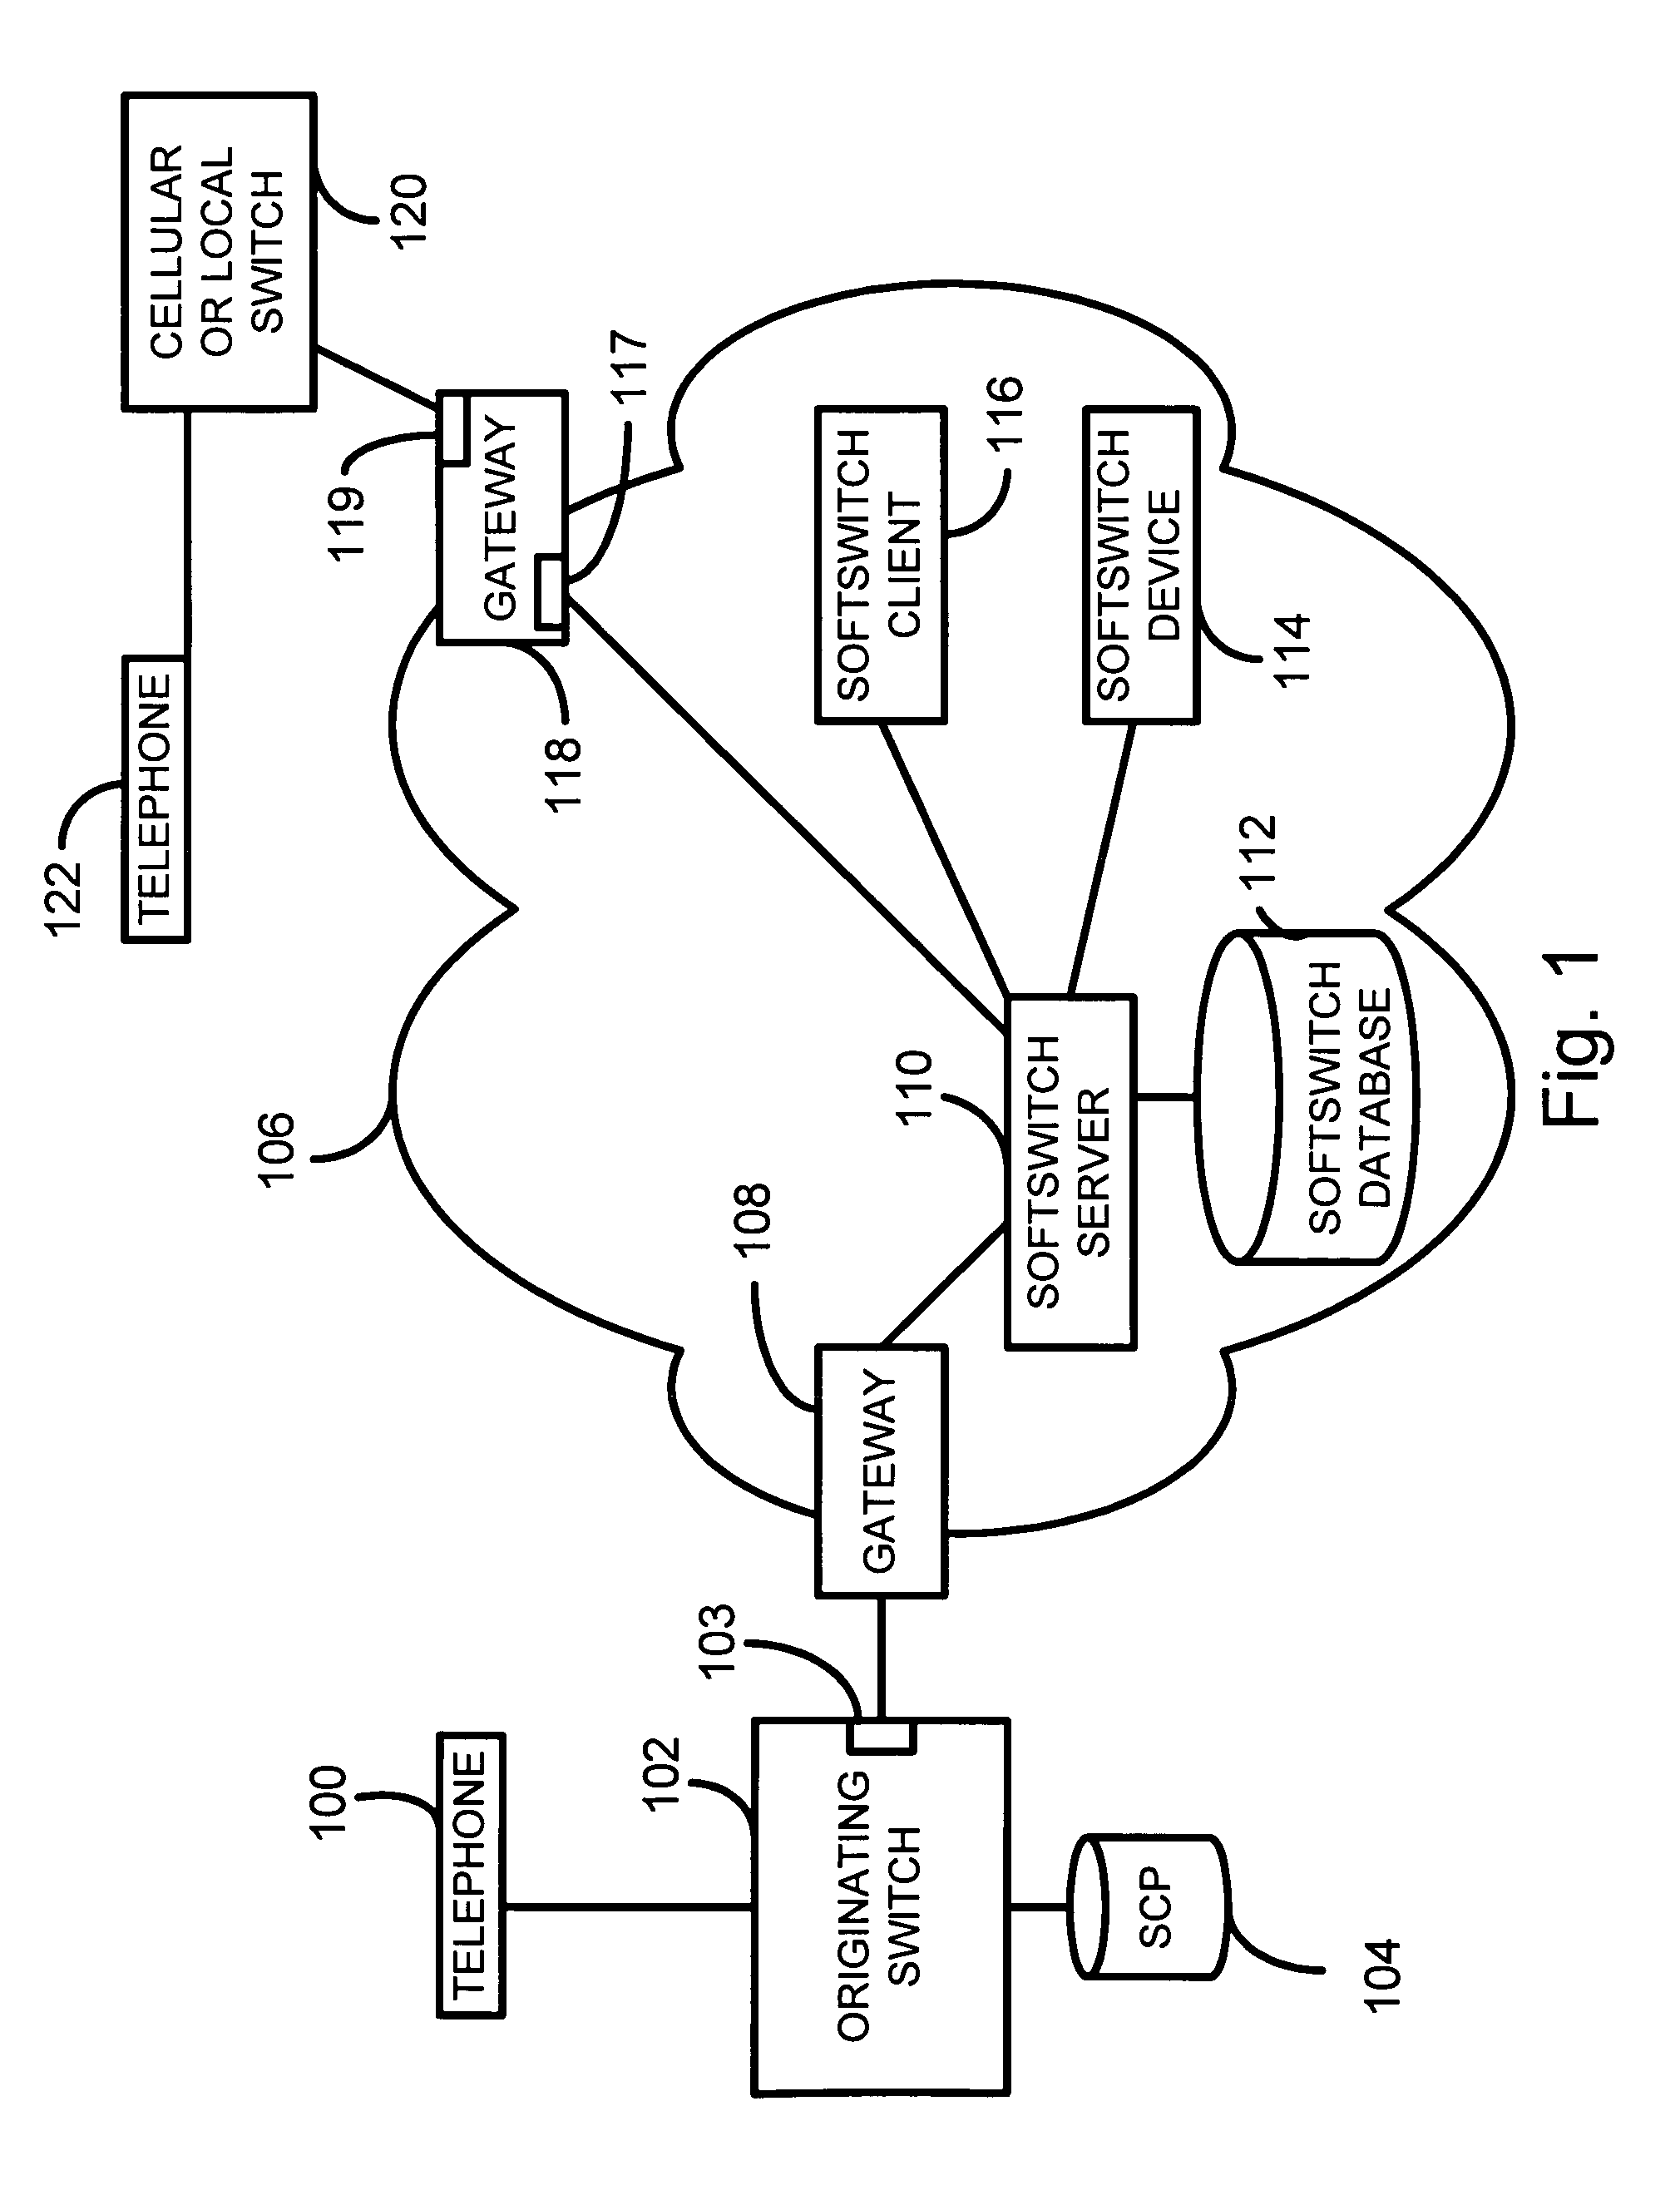 Packet switching dialing plan interface to/from PSTN networks